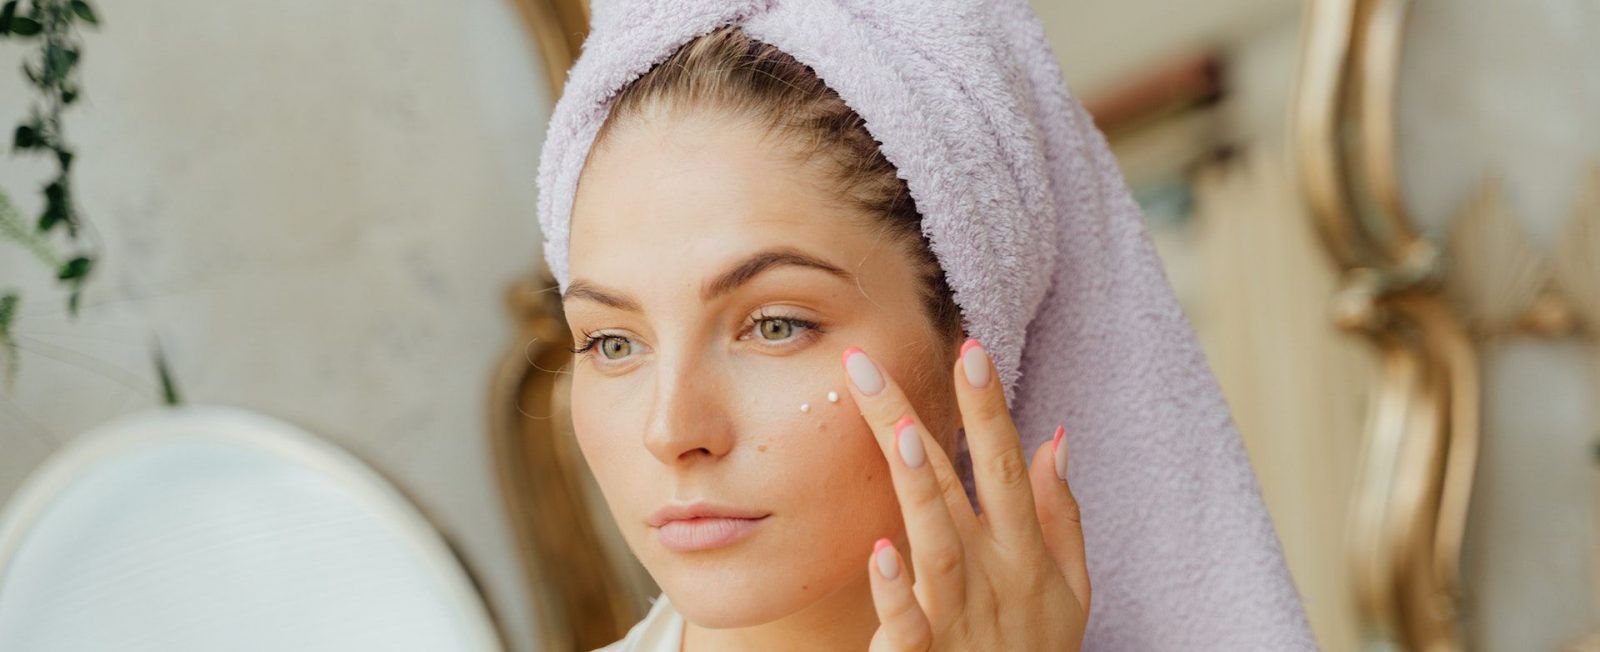 The best moisturizers for oily skin that will keep the skin supple and fresh